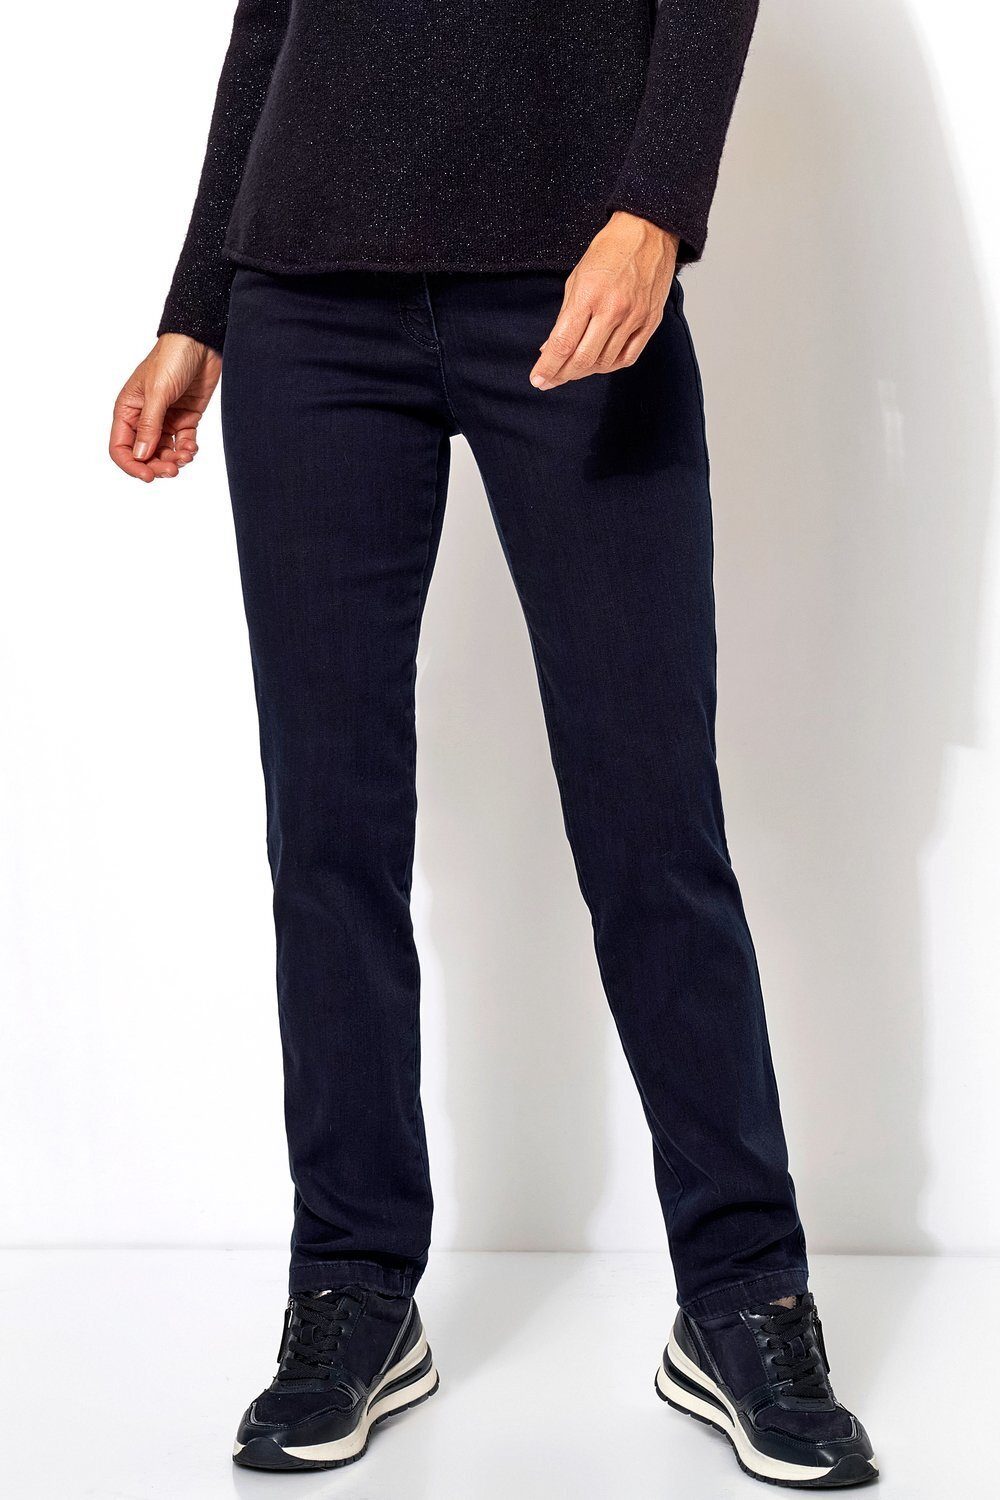 Relaxed by TONI 5-Pocket-Jeans My Love in legerer Passform dunkelblau - 058